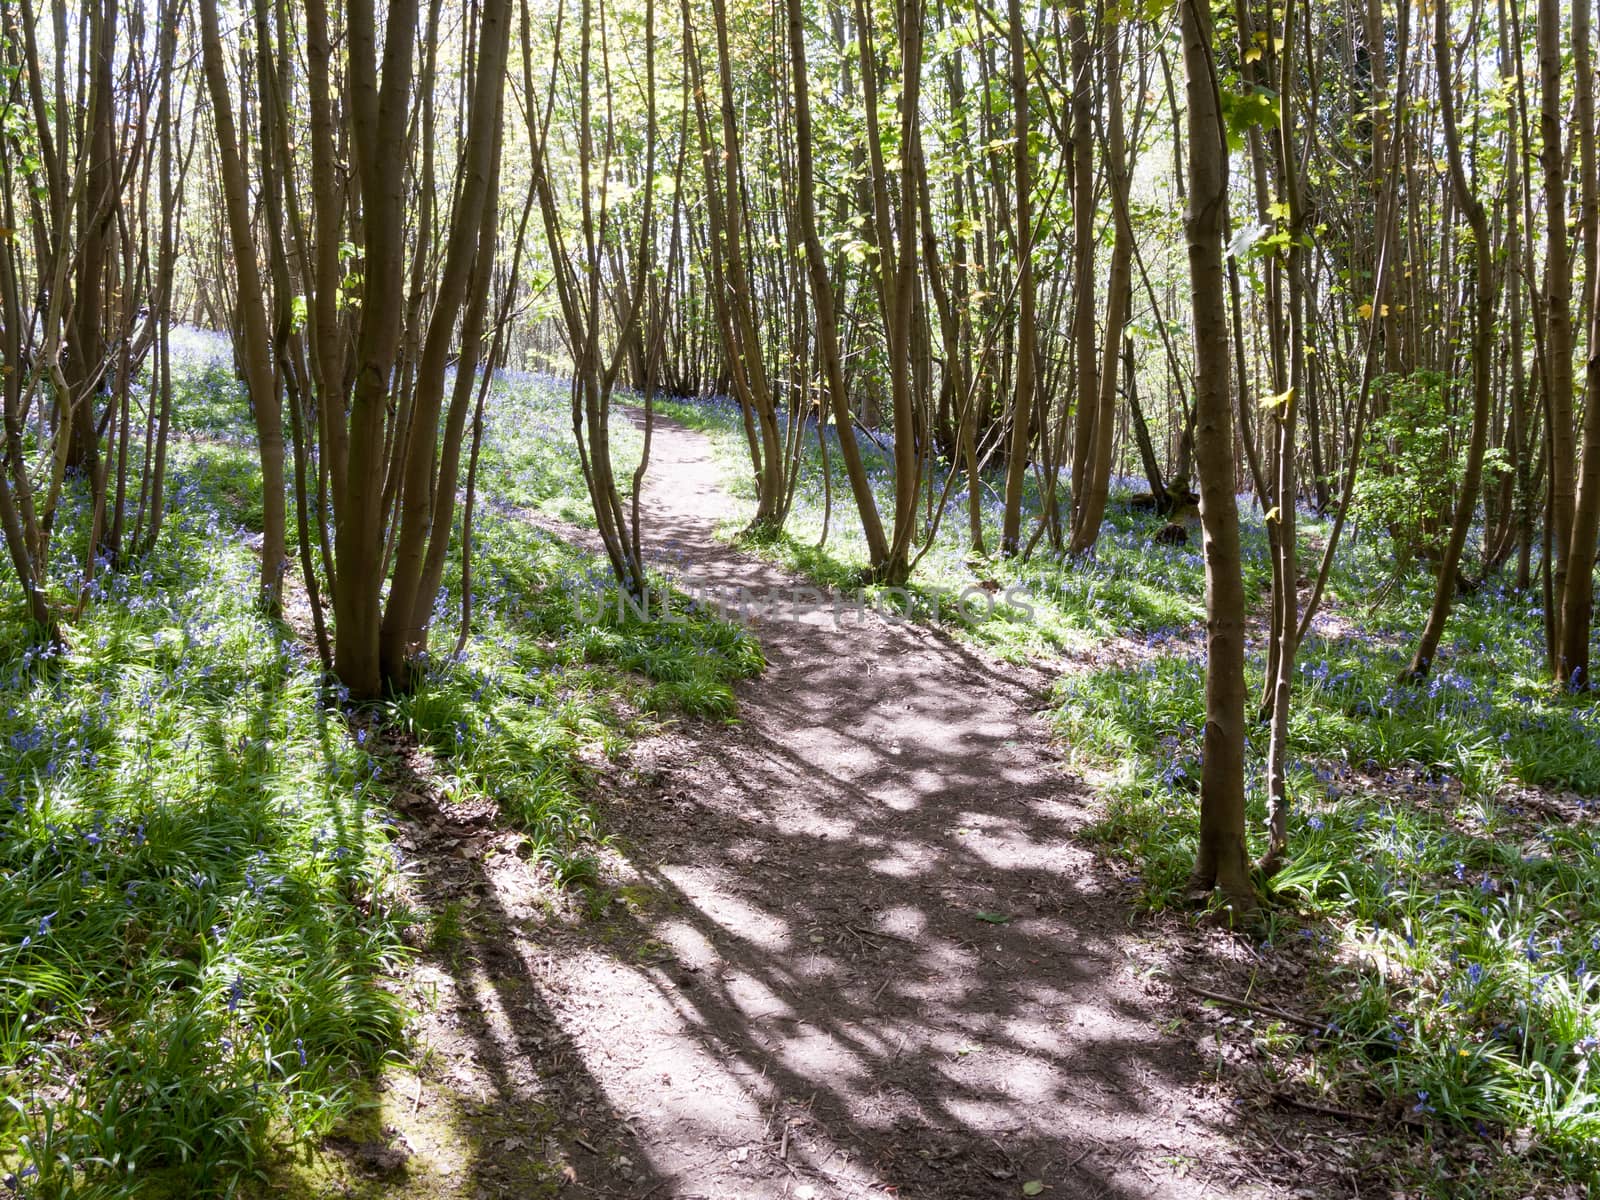 walkway through forest wood UK spring with bluebells growing; essex; england; uk